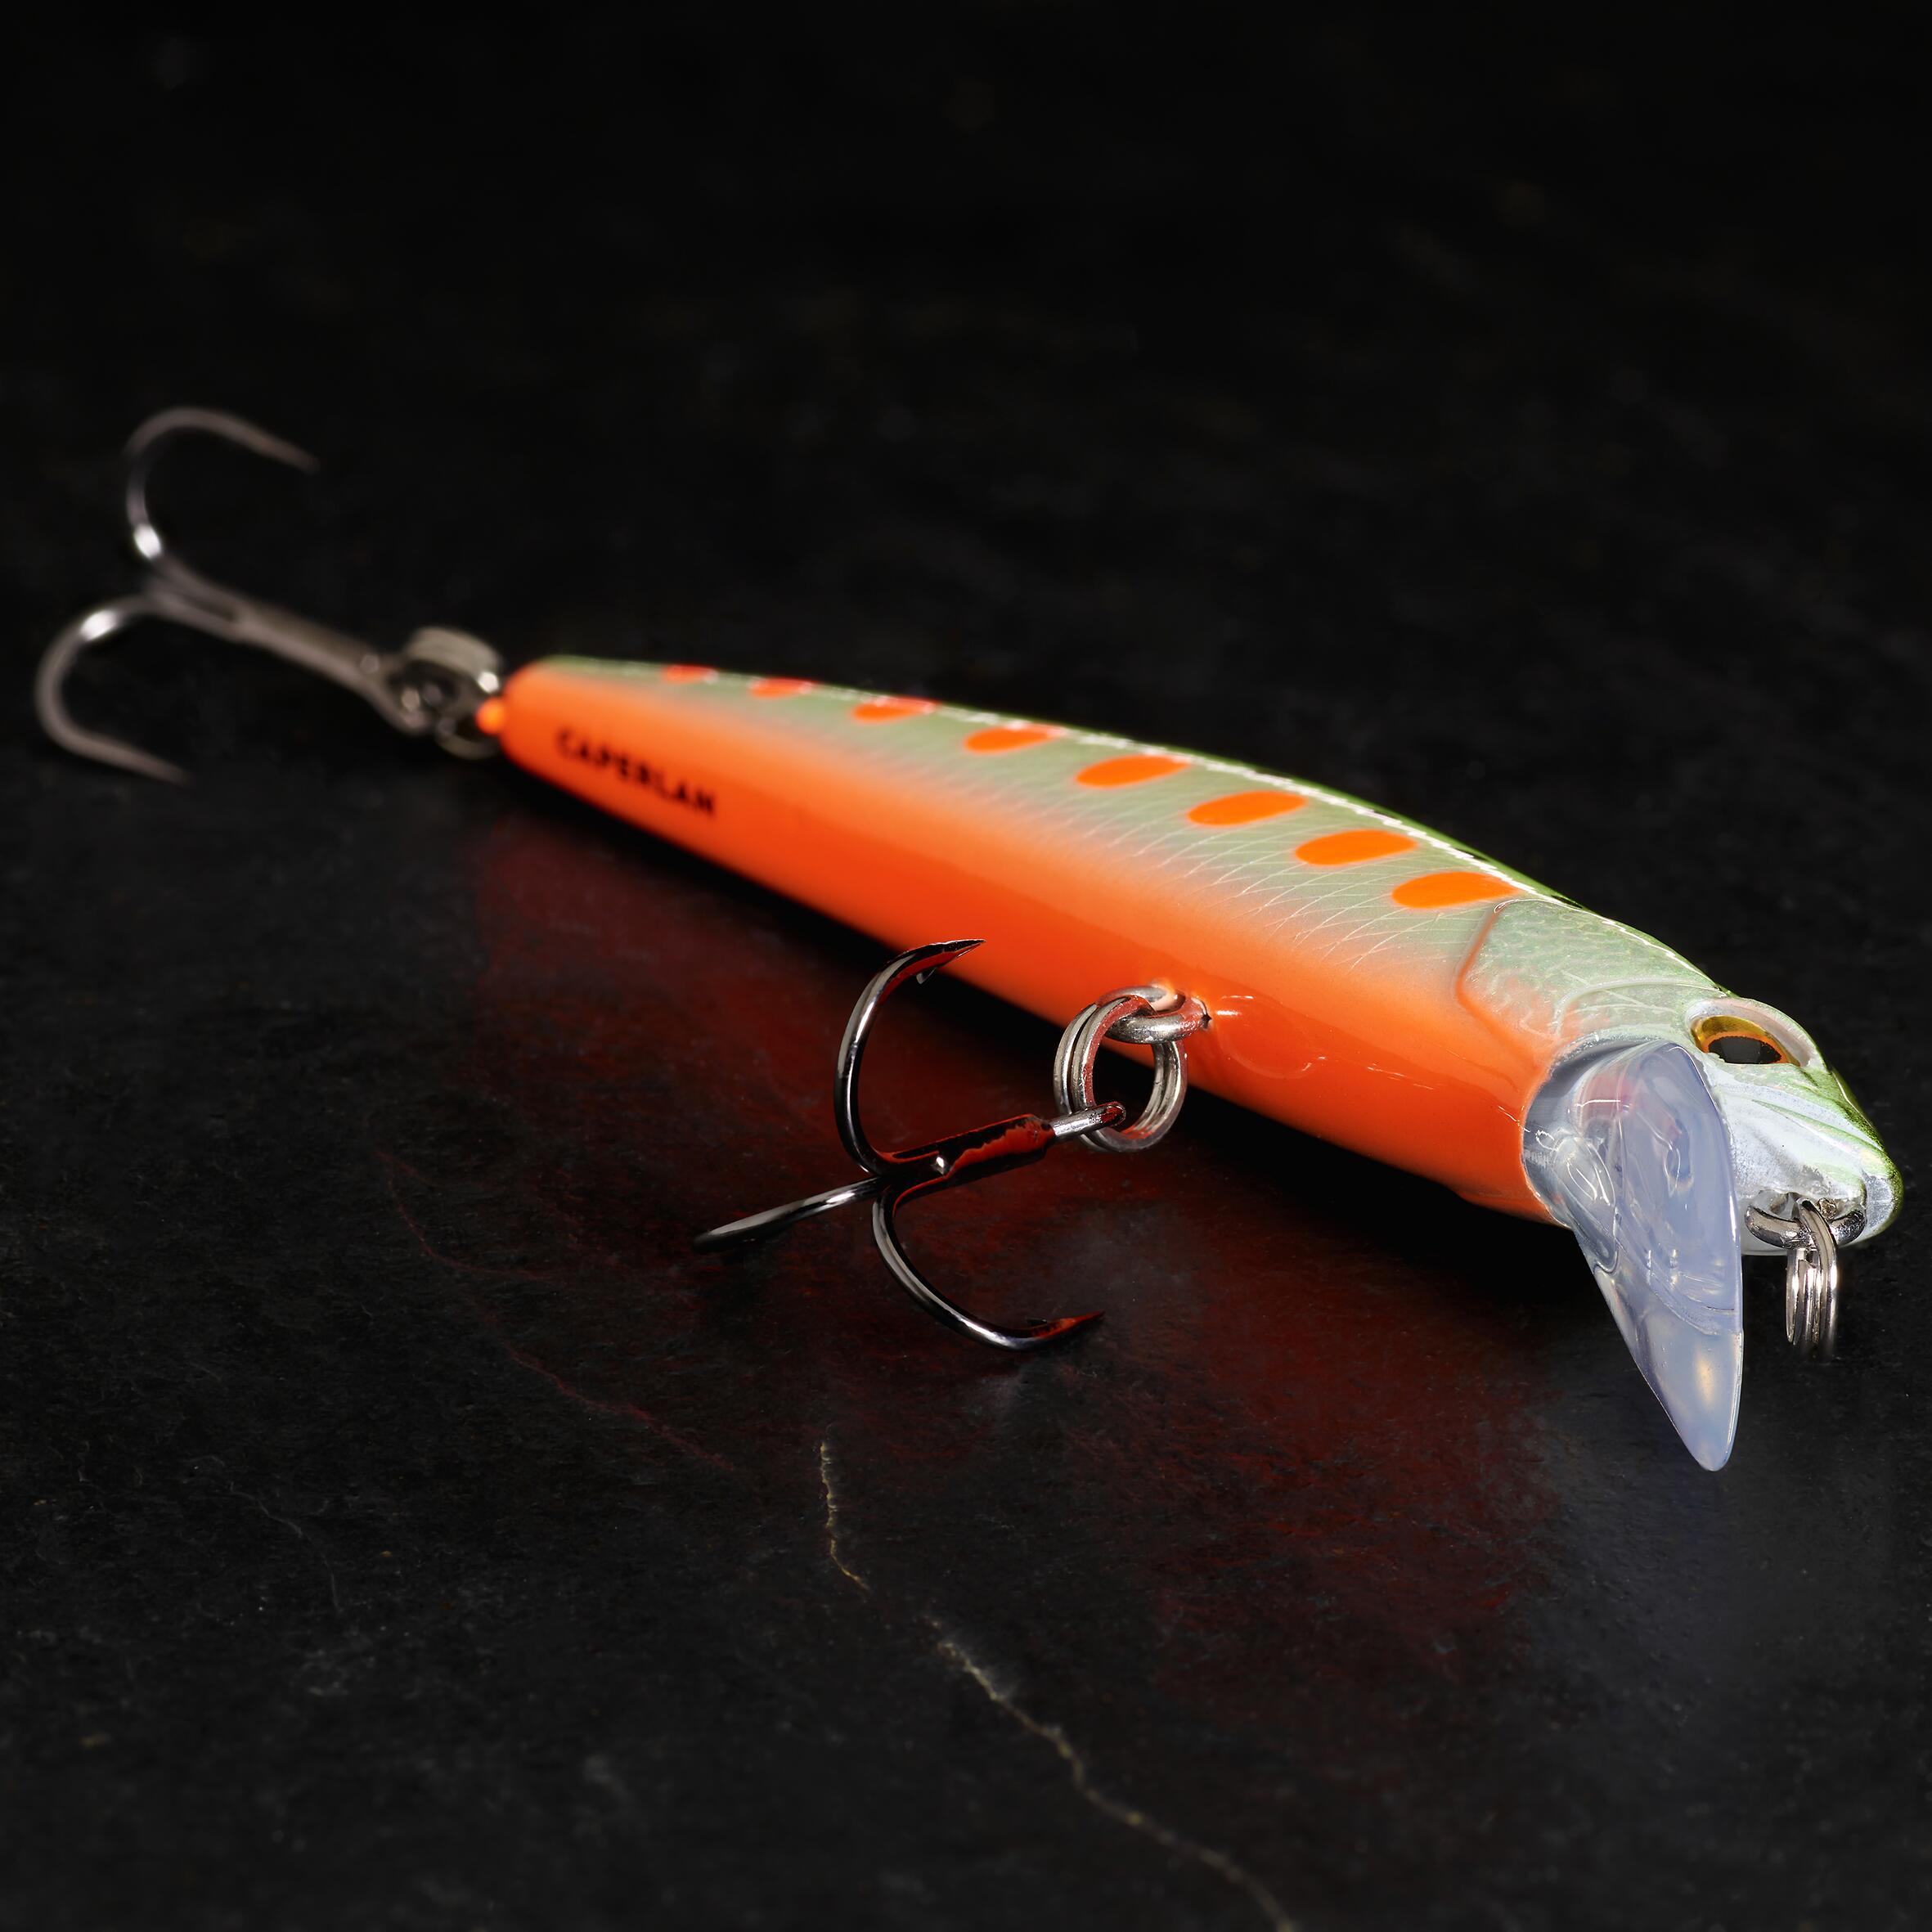 MINNOW HARD LURE FOR TROUT WXM MNWFS 70 US NEON YELLOW 3/4